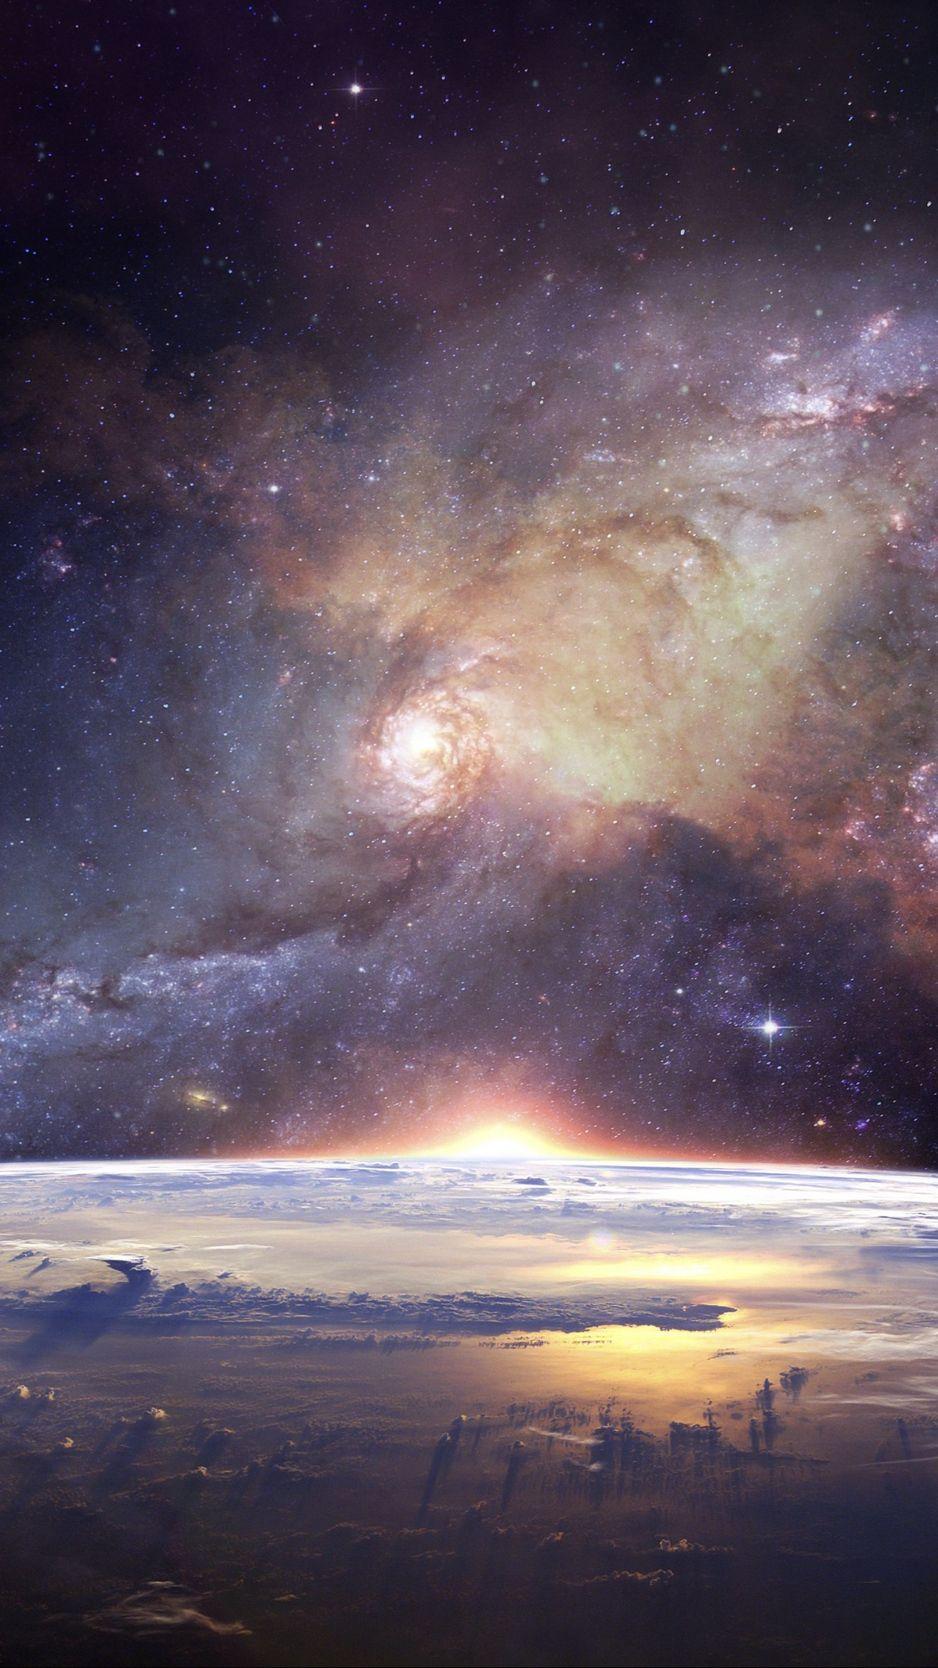 Universe Iphone Wallpapers Top Free Universe Iphone Backgrounds Wallpaperaccess